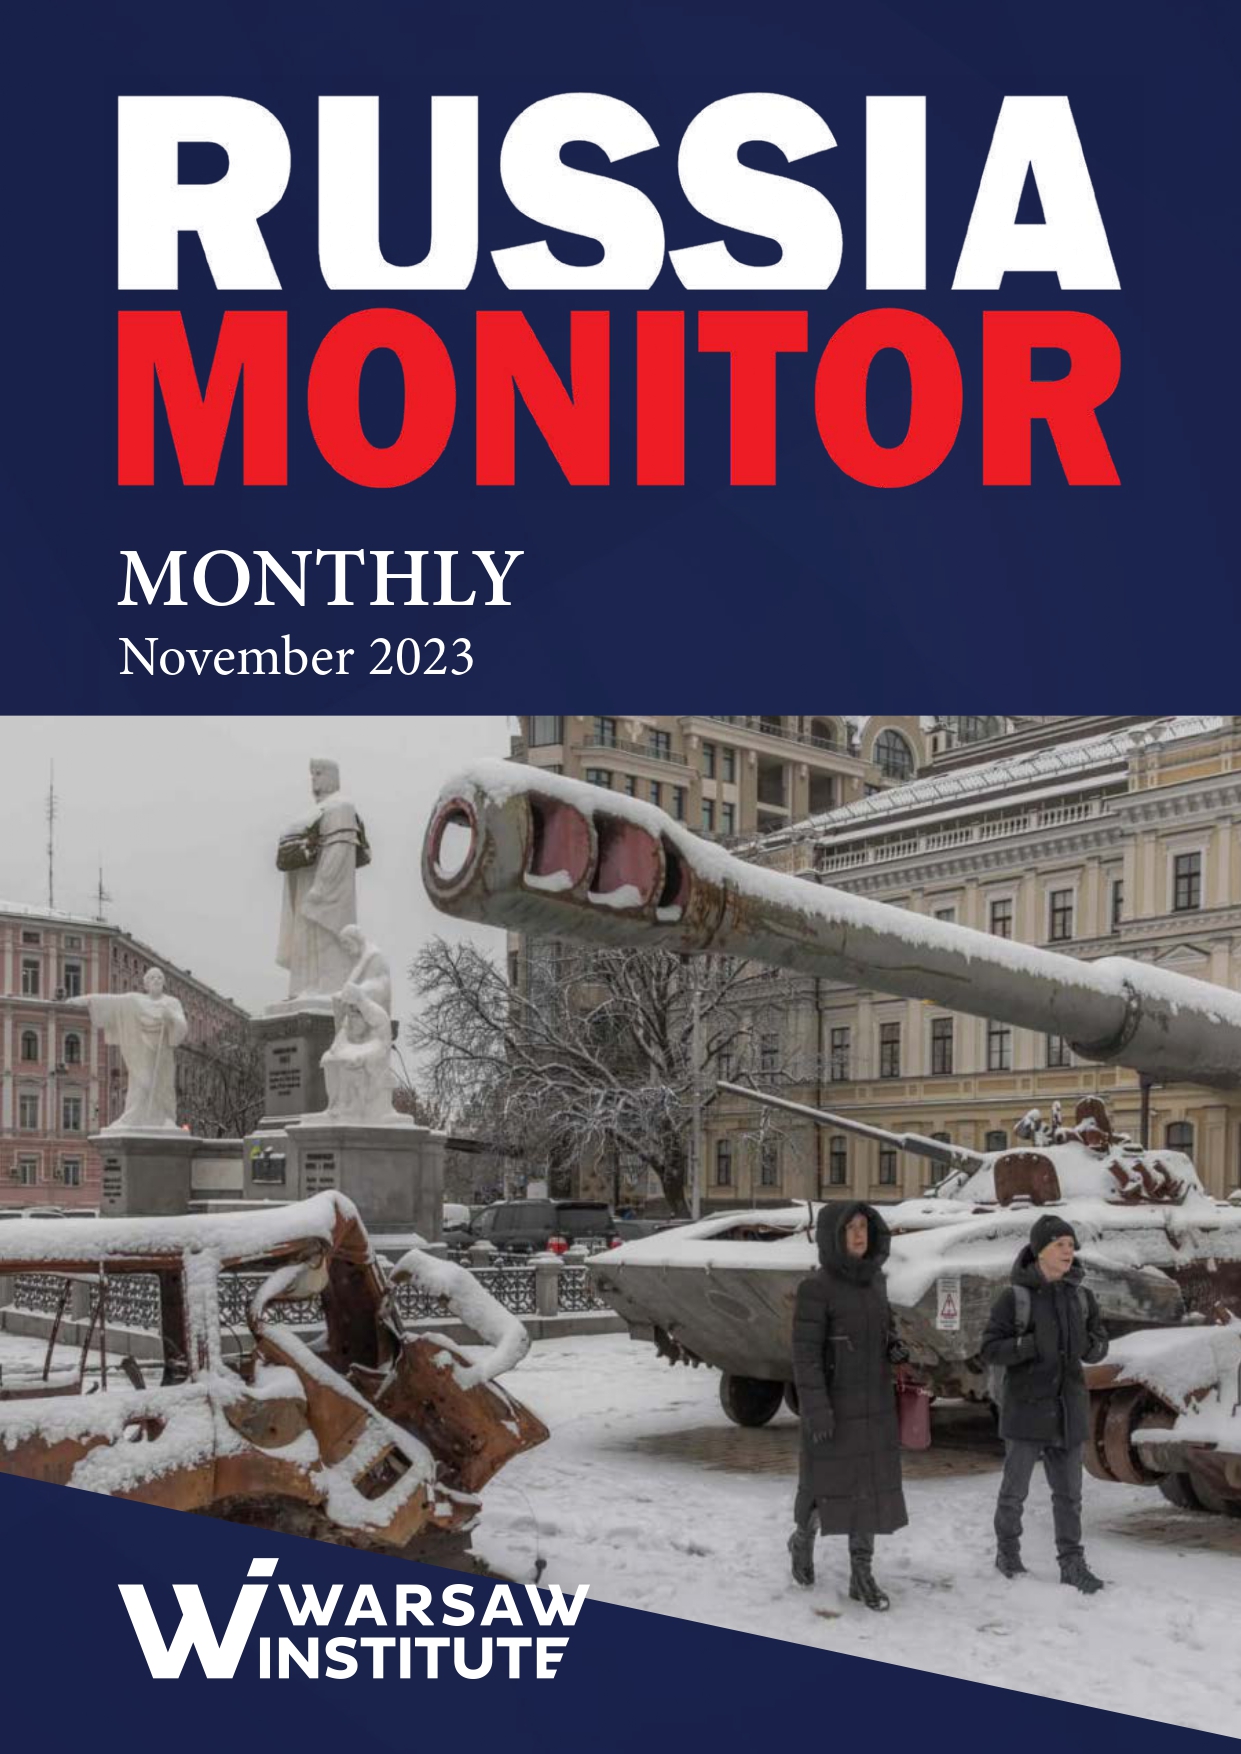 Russia Monitor Monthly 11/23